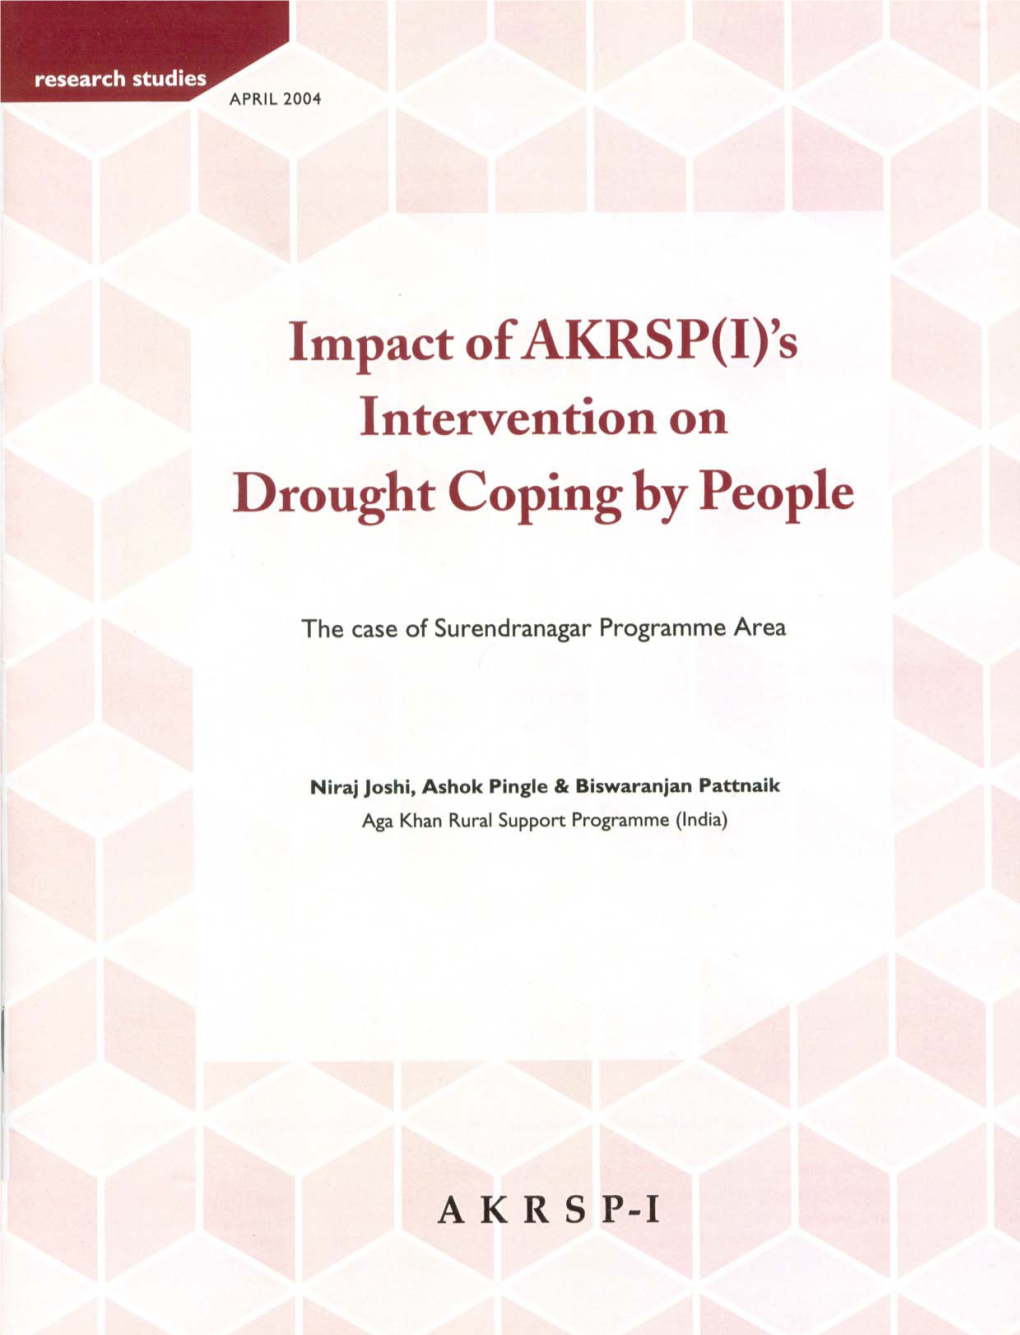 Impact of AKRSP(I) Intervention on Drought Coping by Rural Communities the Case of Surendranagar Programme Area